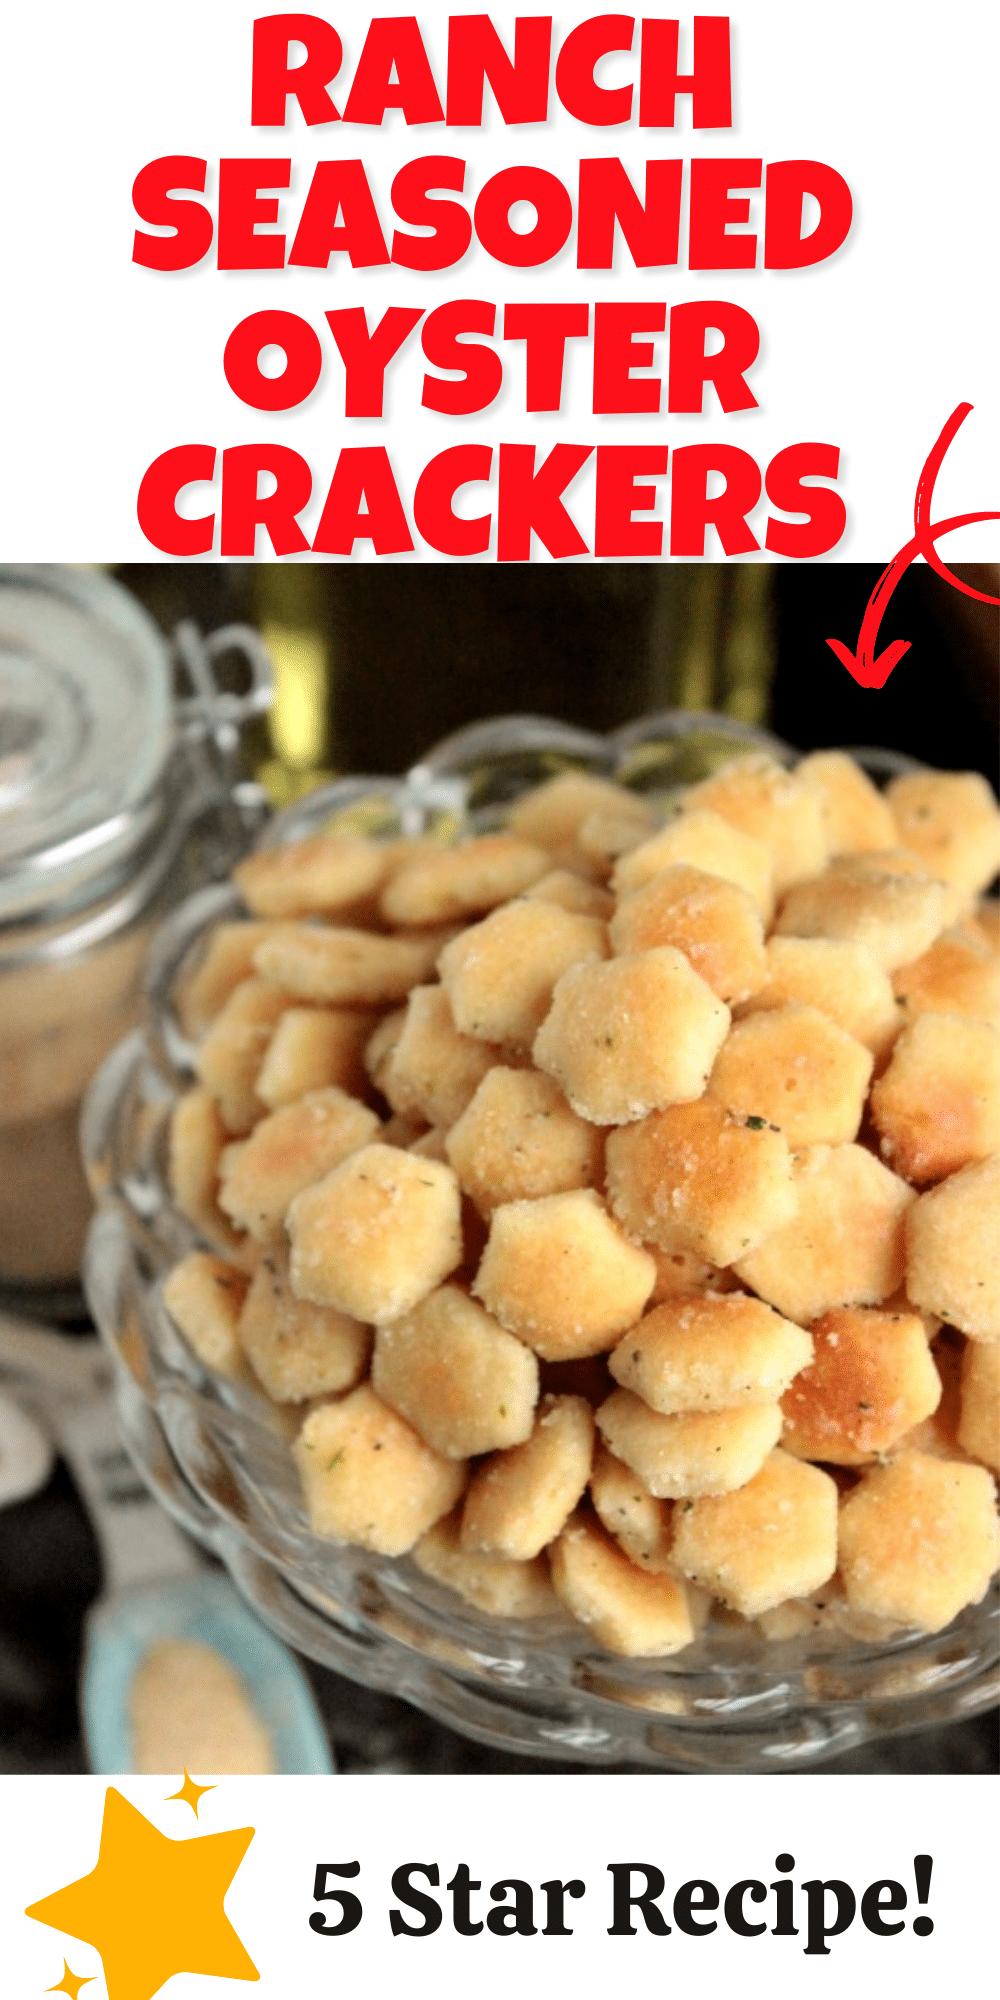 In need of a super simple dish to make for a party or just want to snack on a fun vintage recipe? These Ranch Seasoned Oyster Crackers are just what you need! Made with oyster crackers, ranch seasoning and a few more ingredients, these little crackers are delicious and super easy to make!  via @bigbearswife